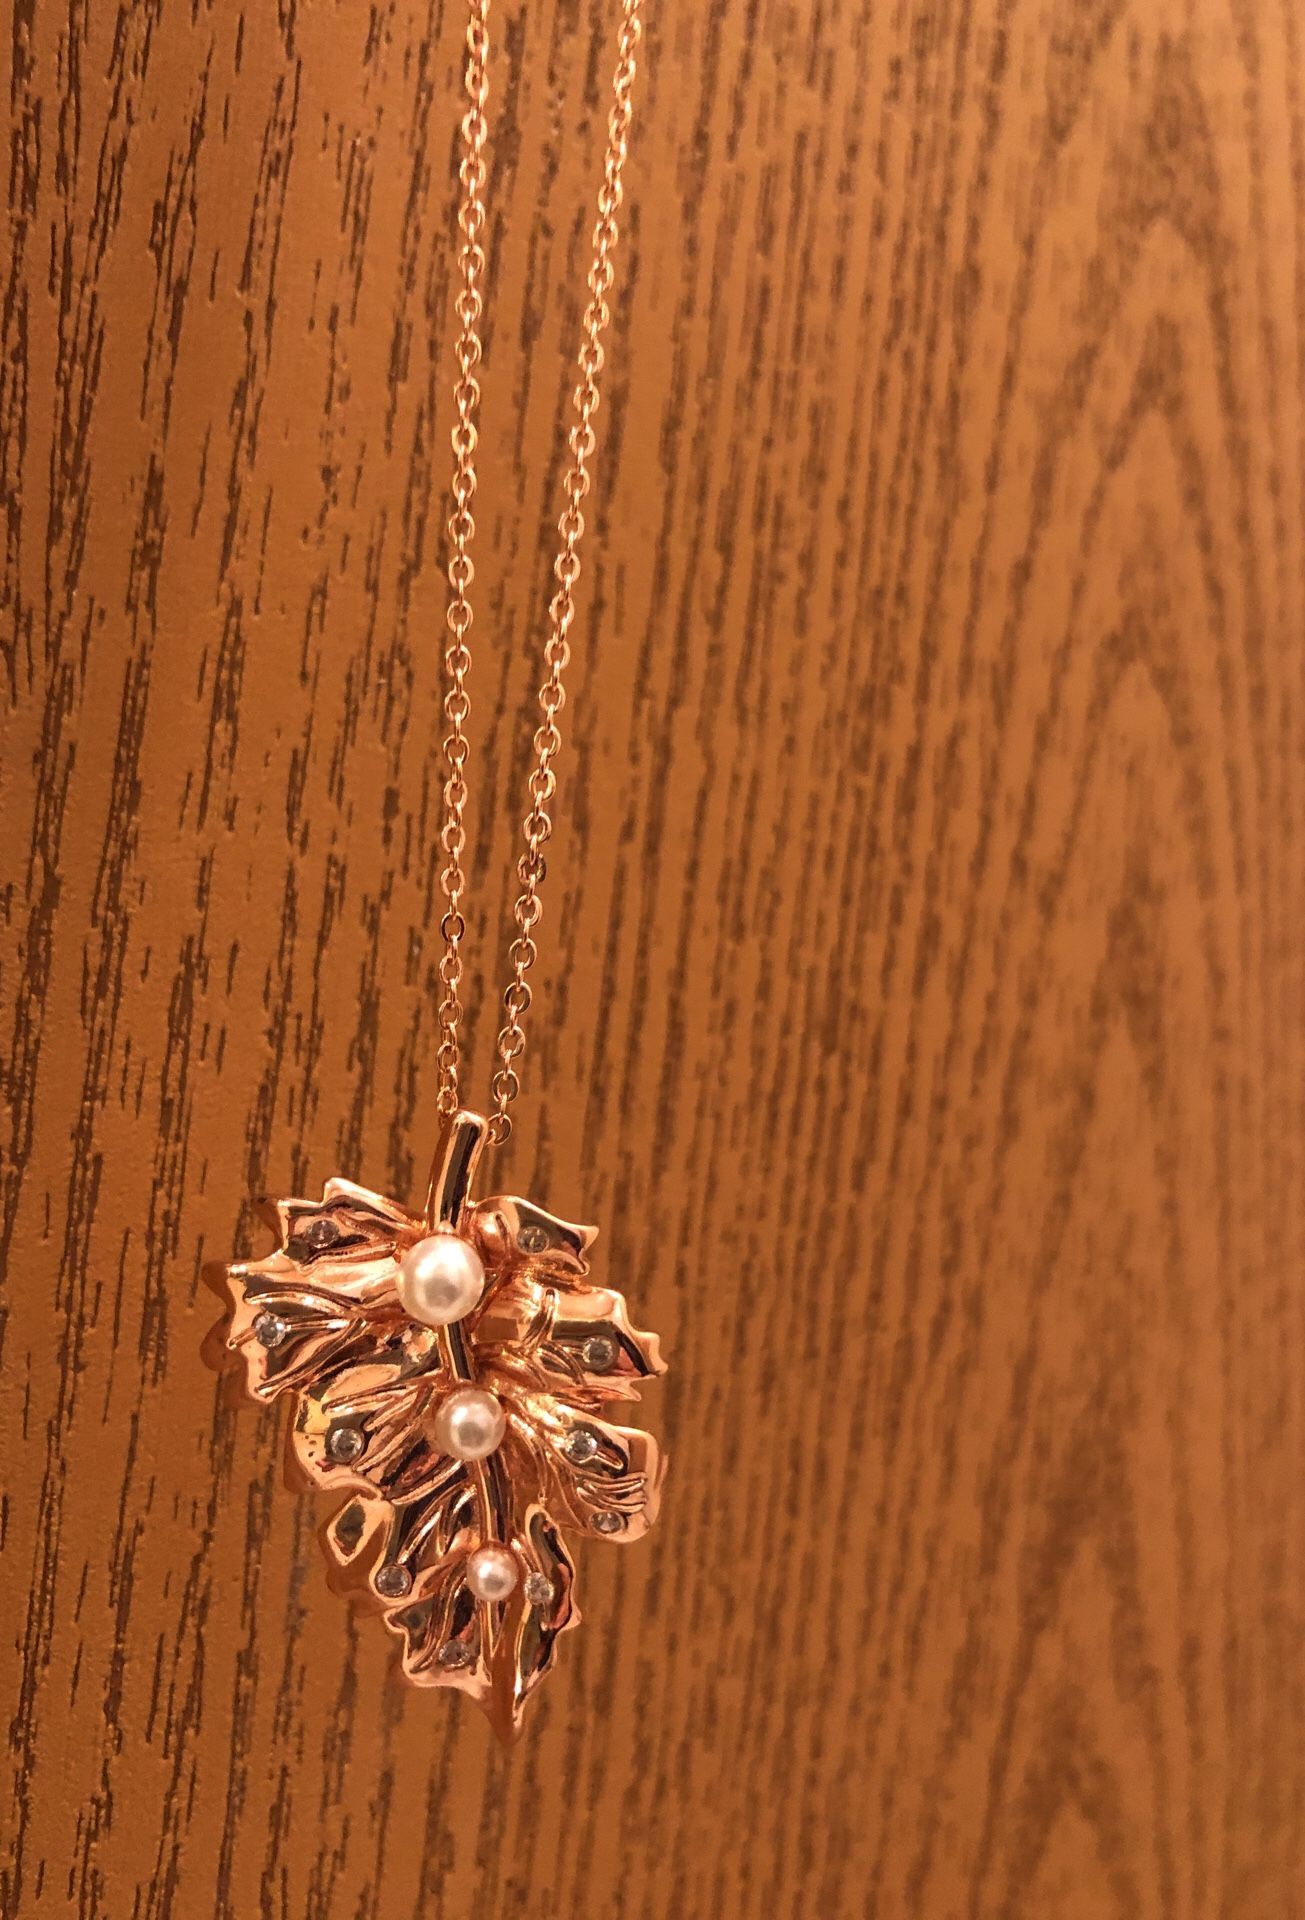 Rose Gold necklace